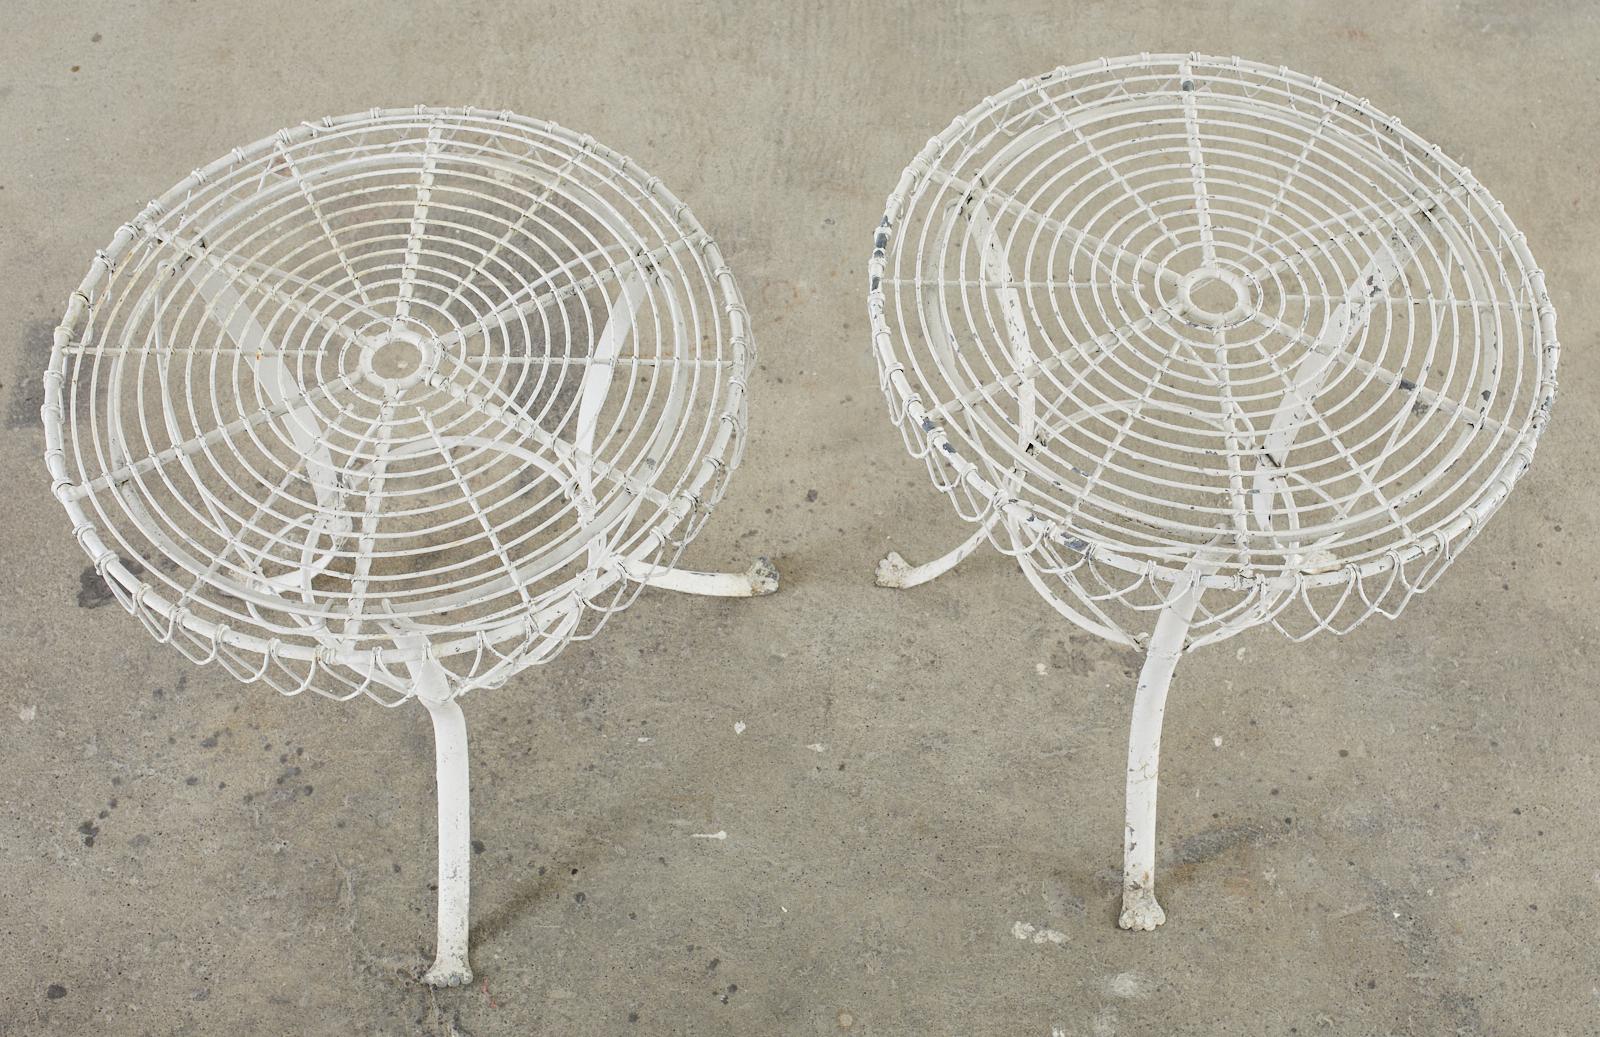 Pair of French Art Nouveau Style Iron Wire Garden Tables In Good Condition For Sale In Rio Vista, CA